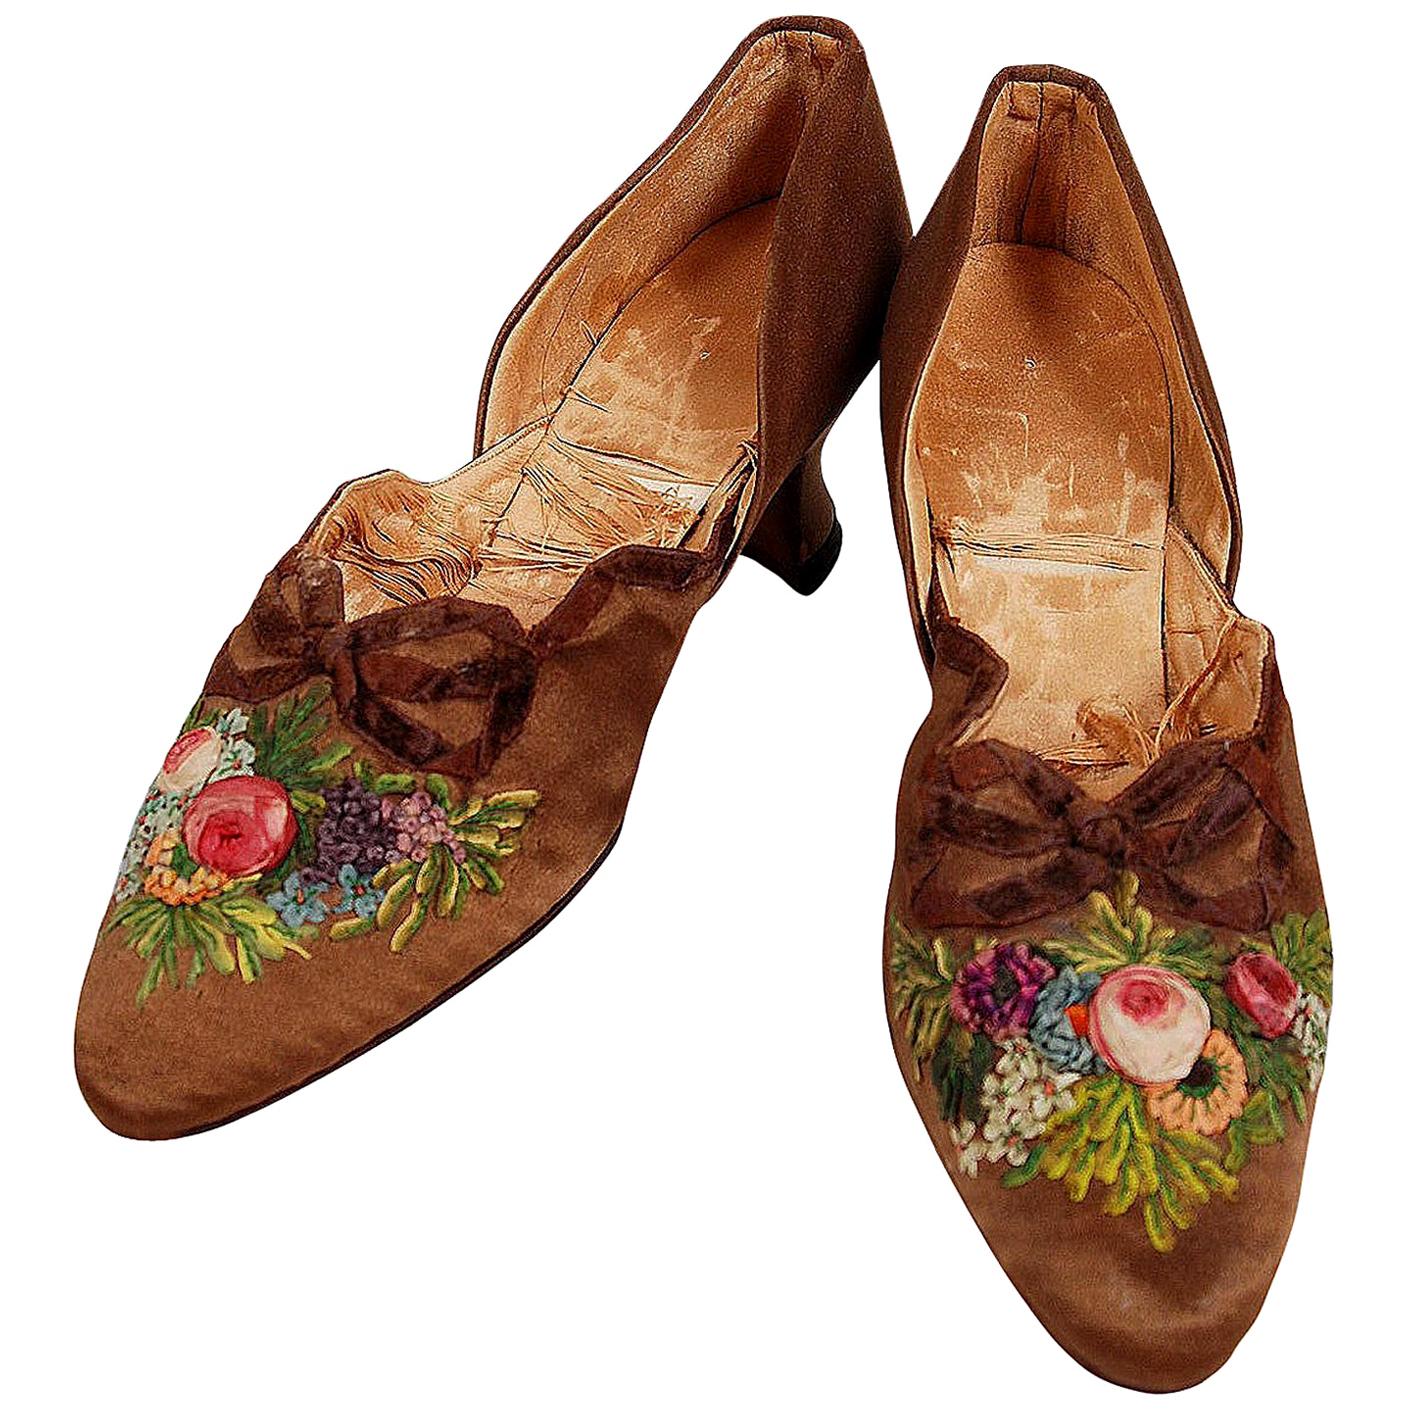 Vintage 1910's Laird Schober Couture Floral Embroidered Applique Rosettes Shoes